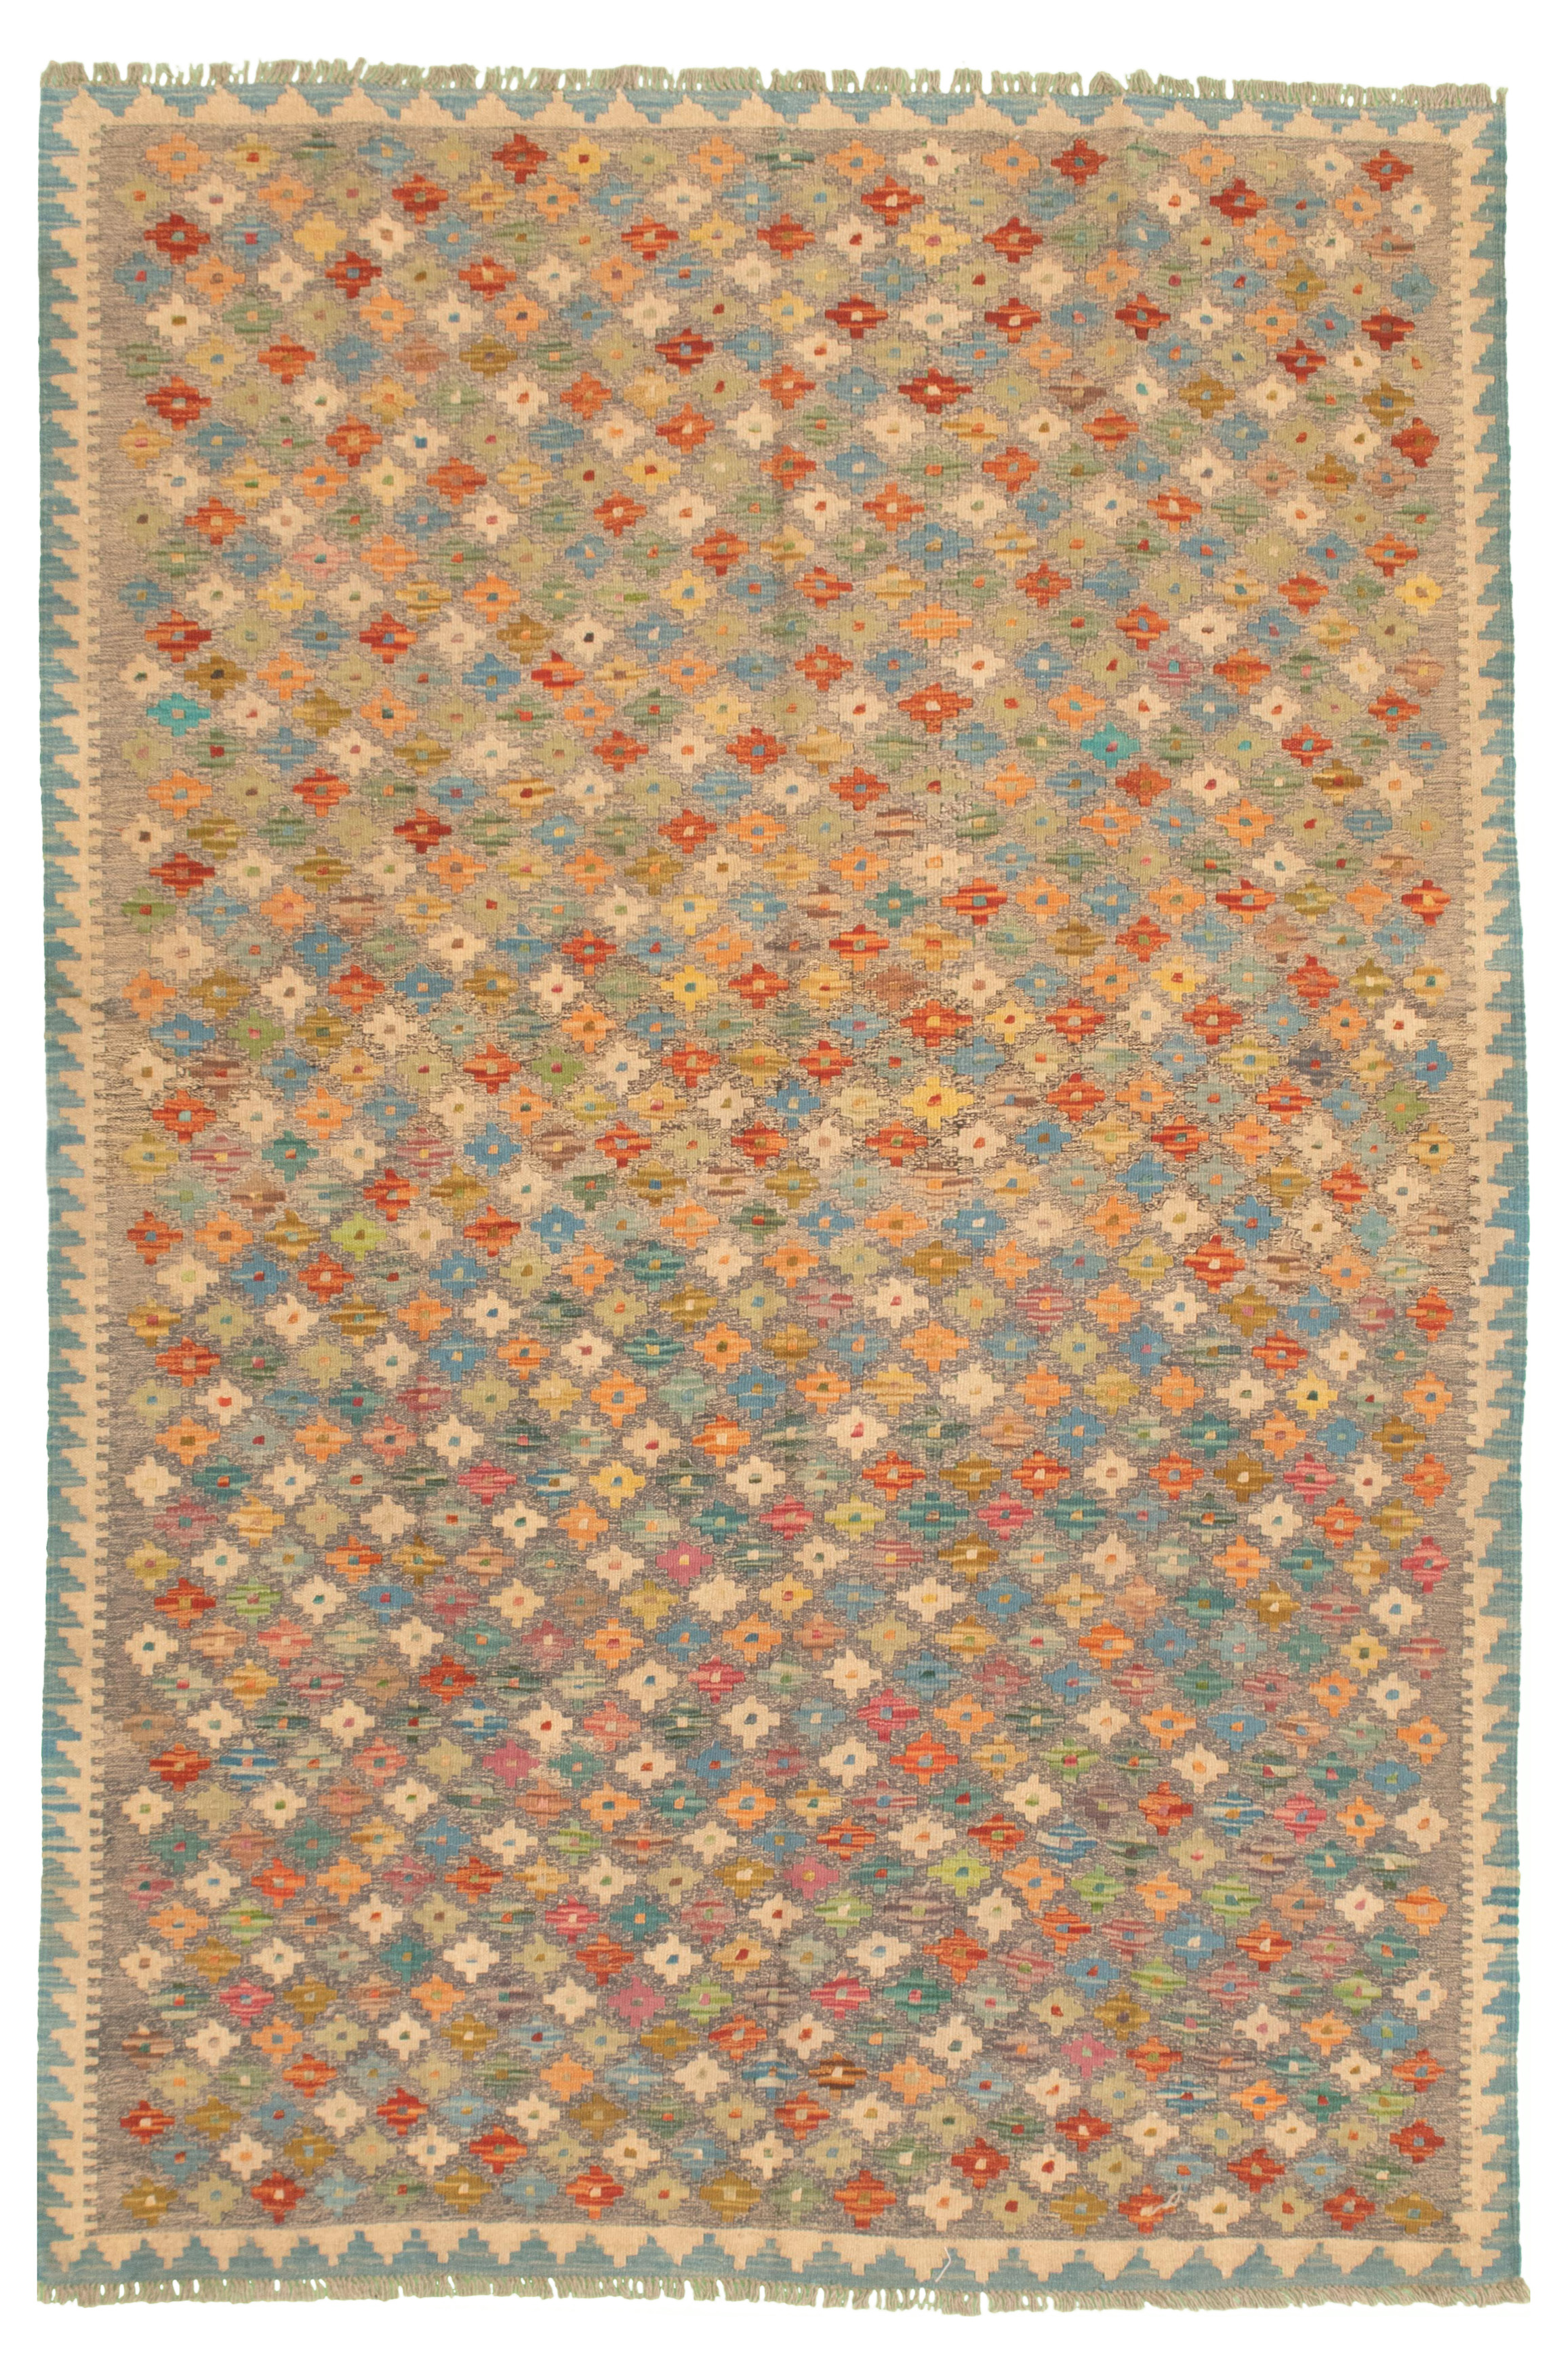 Hand woven Bold and Colorful  Cream, Grey Wool Kilim 5'7" x 8'1" Size: 5'7" x 8'1"  